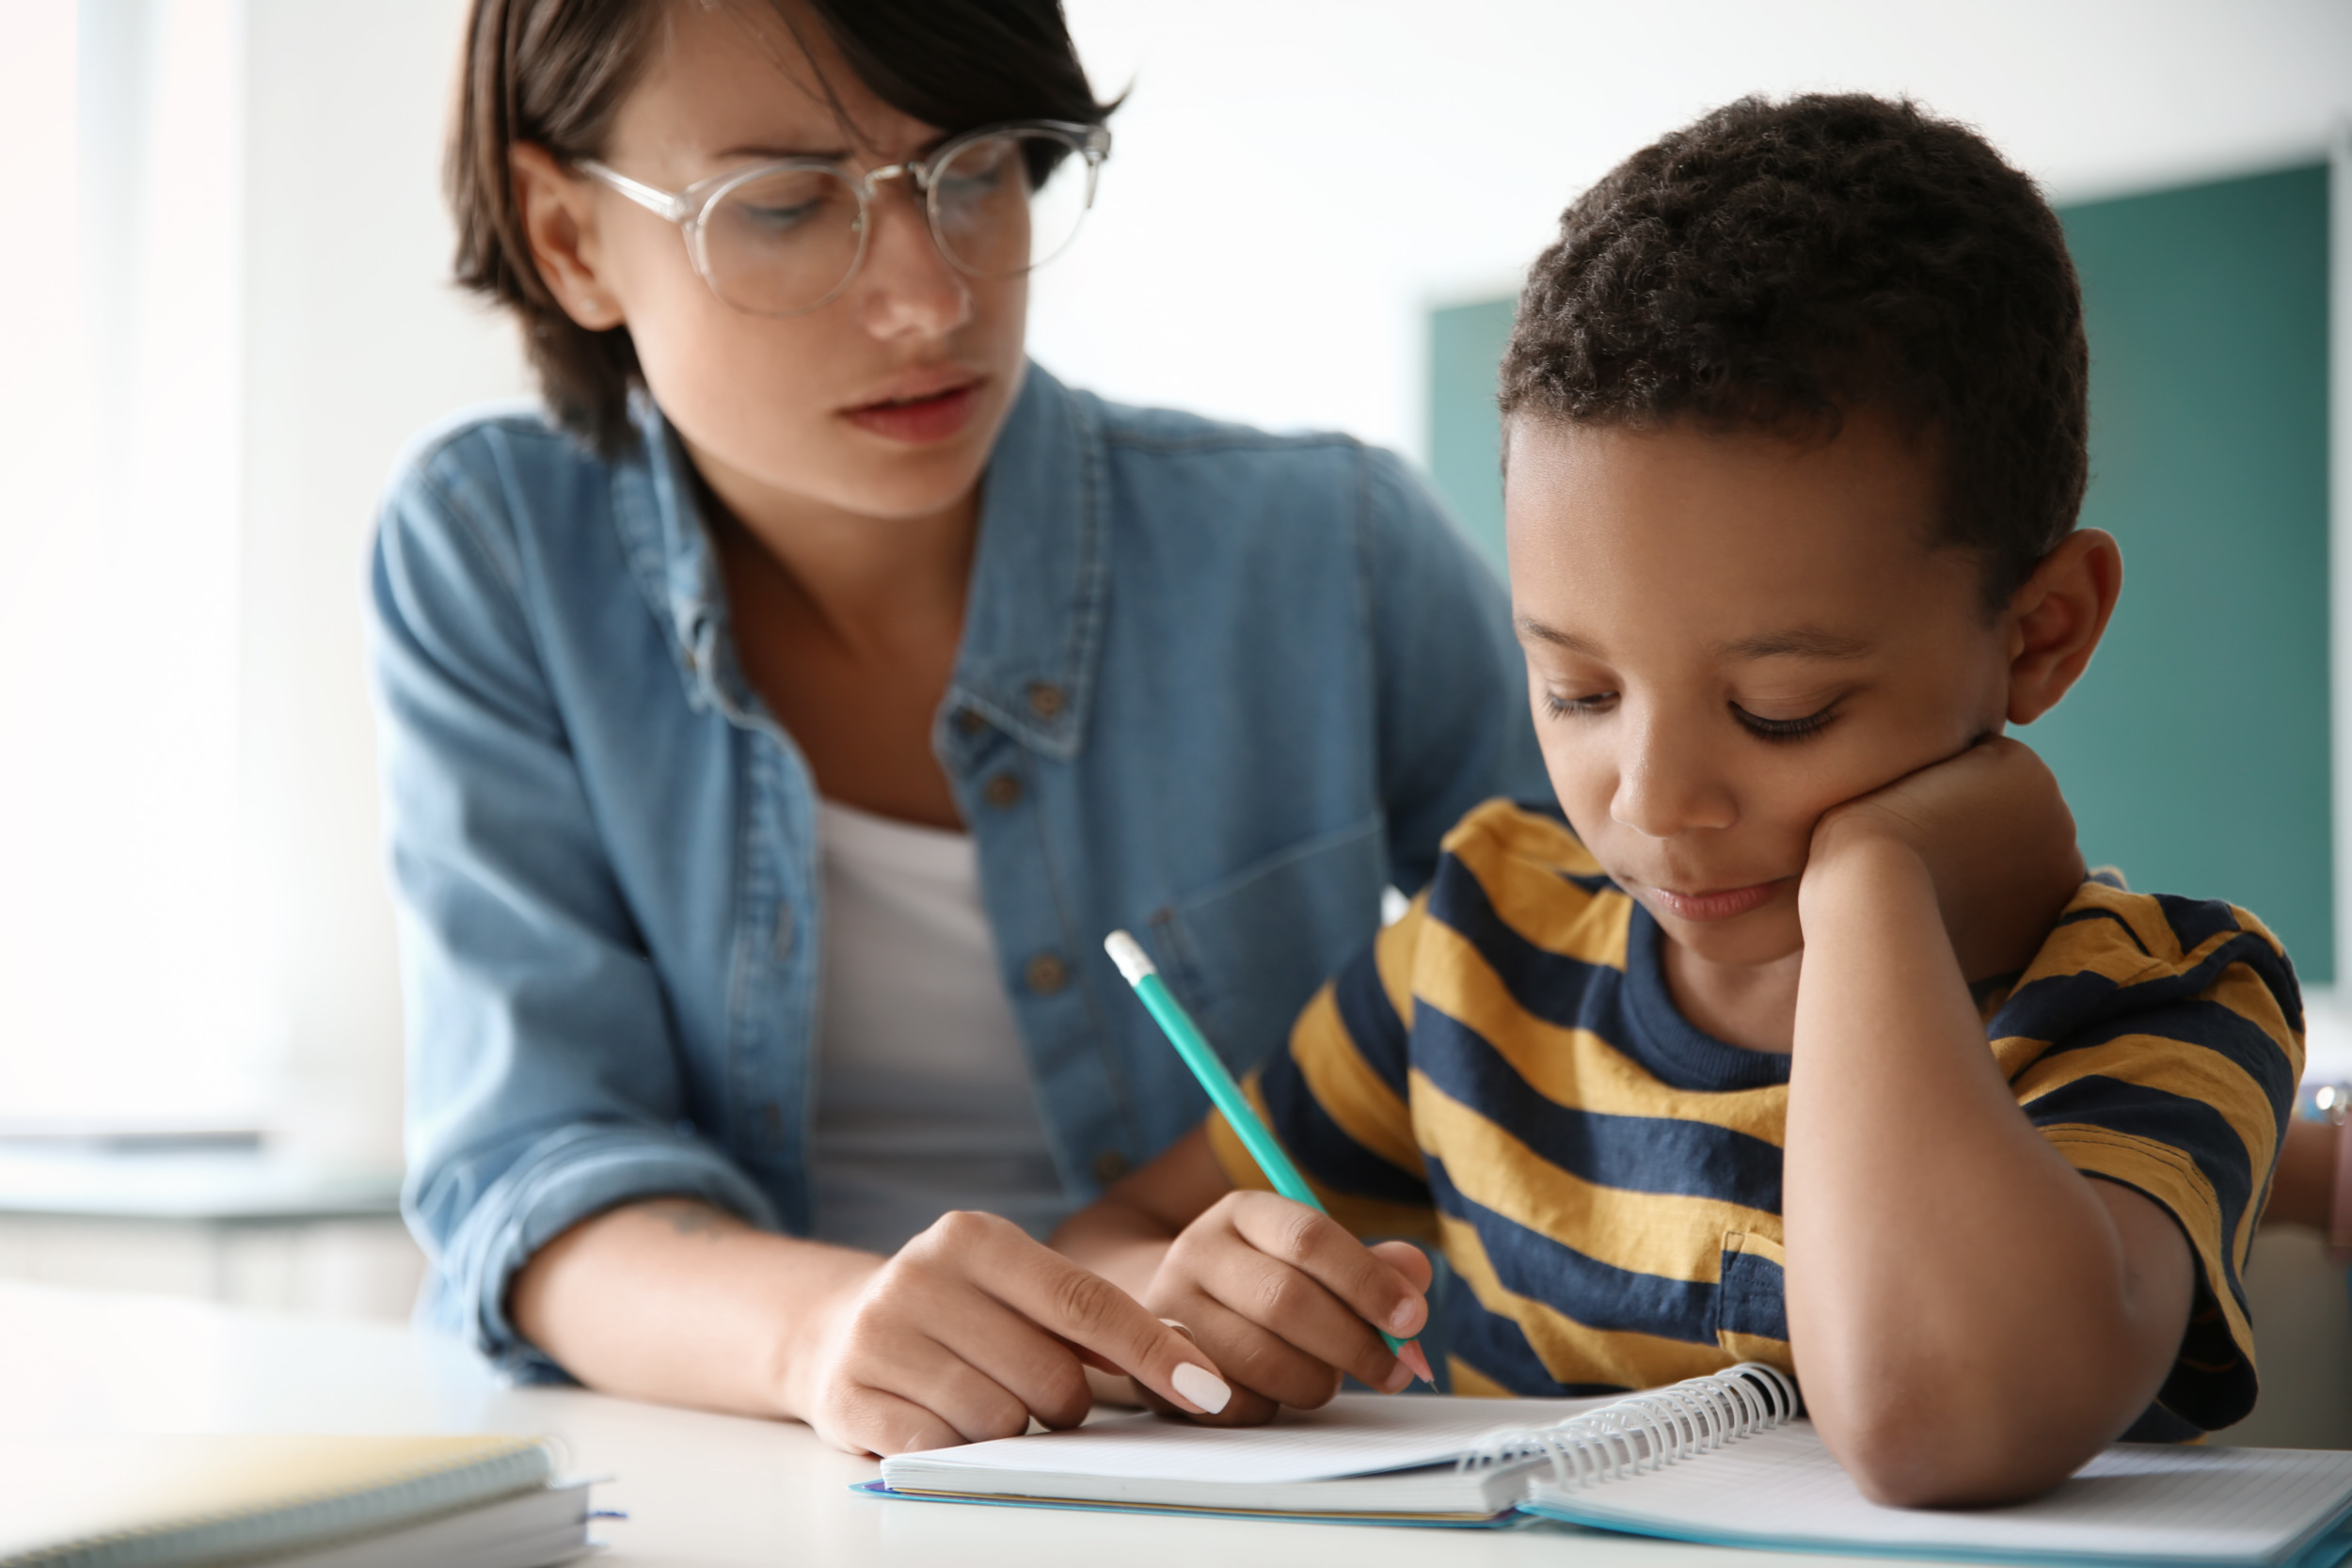 Tutoring: Young adult in clear-framed glasses and light blue shirt sits next to young child in gold/navy striped t-shirt as they review schoolwork on desk